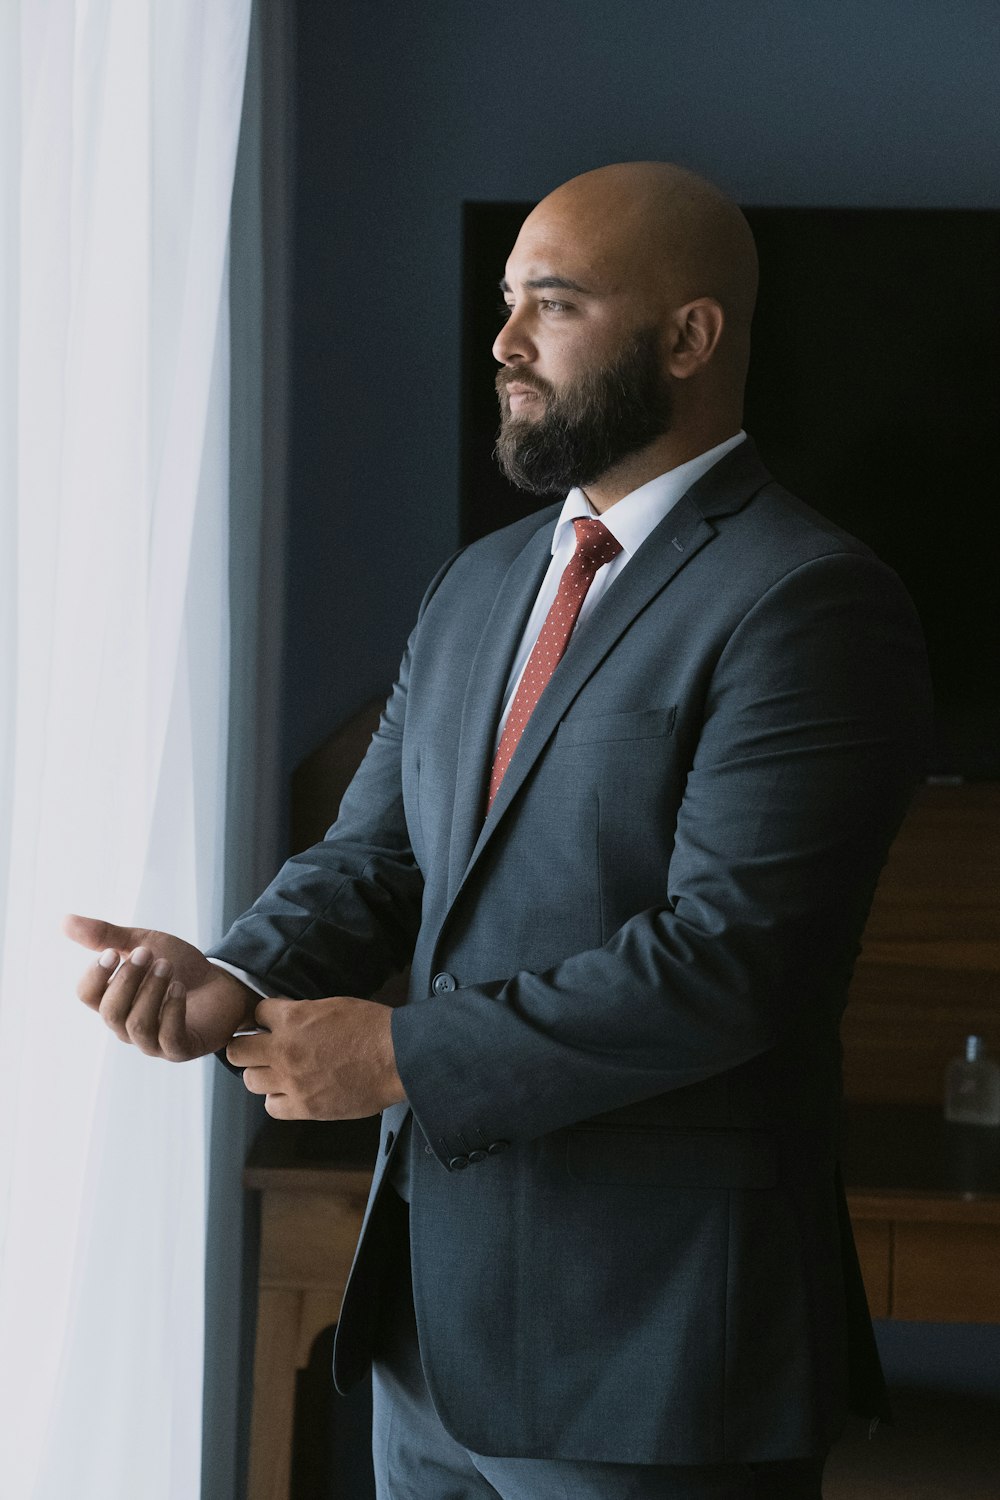 a bald man in a suit standing next to a window